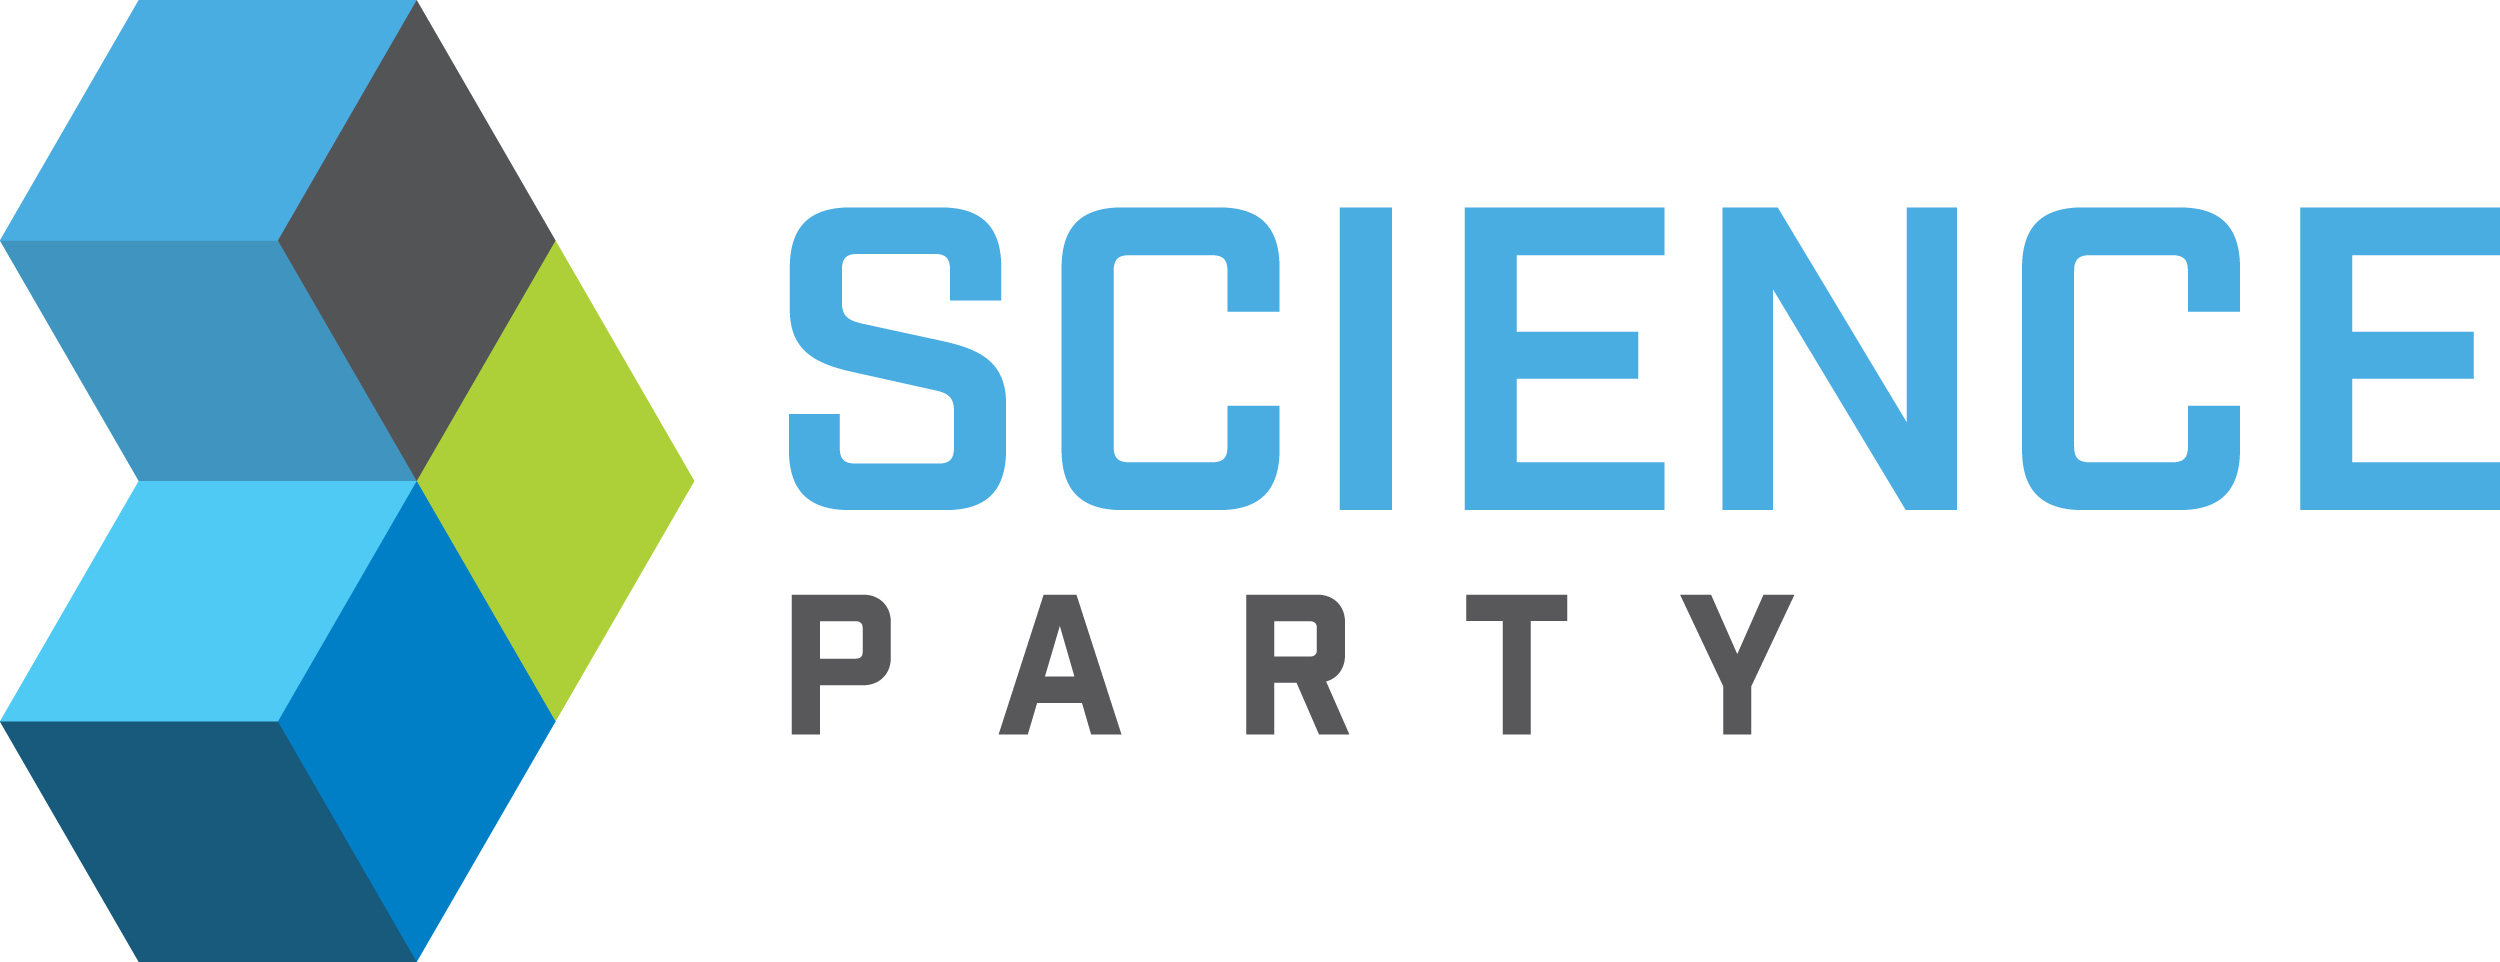 Peter Xing - Science Party Candidate for Wentworth 2016